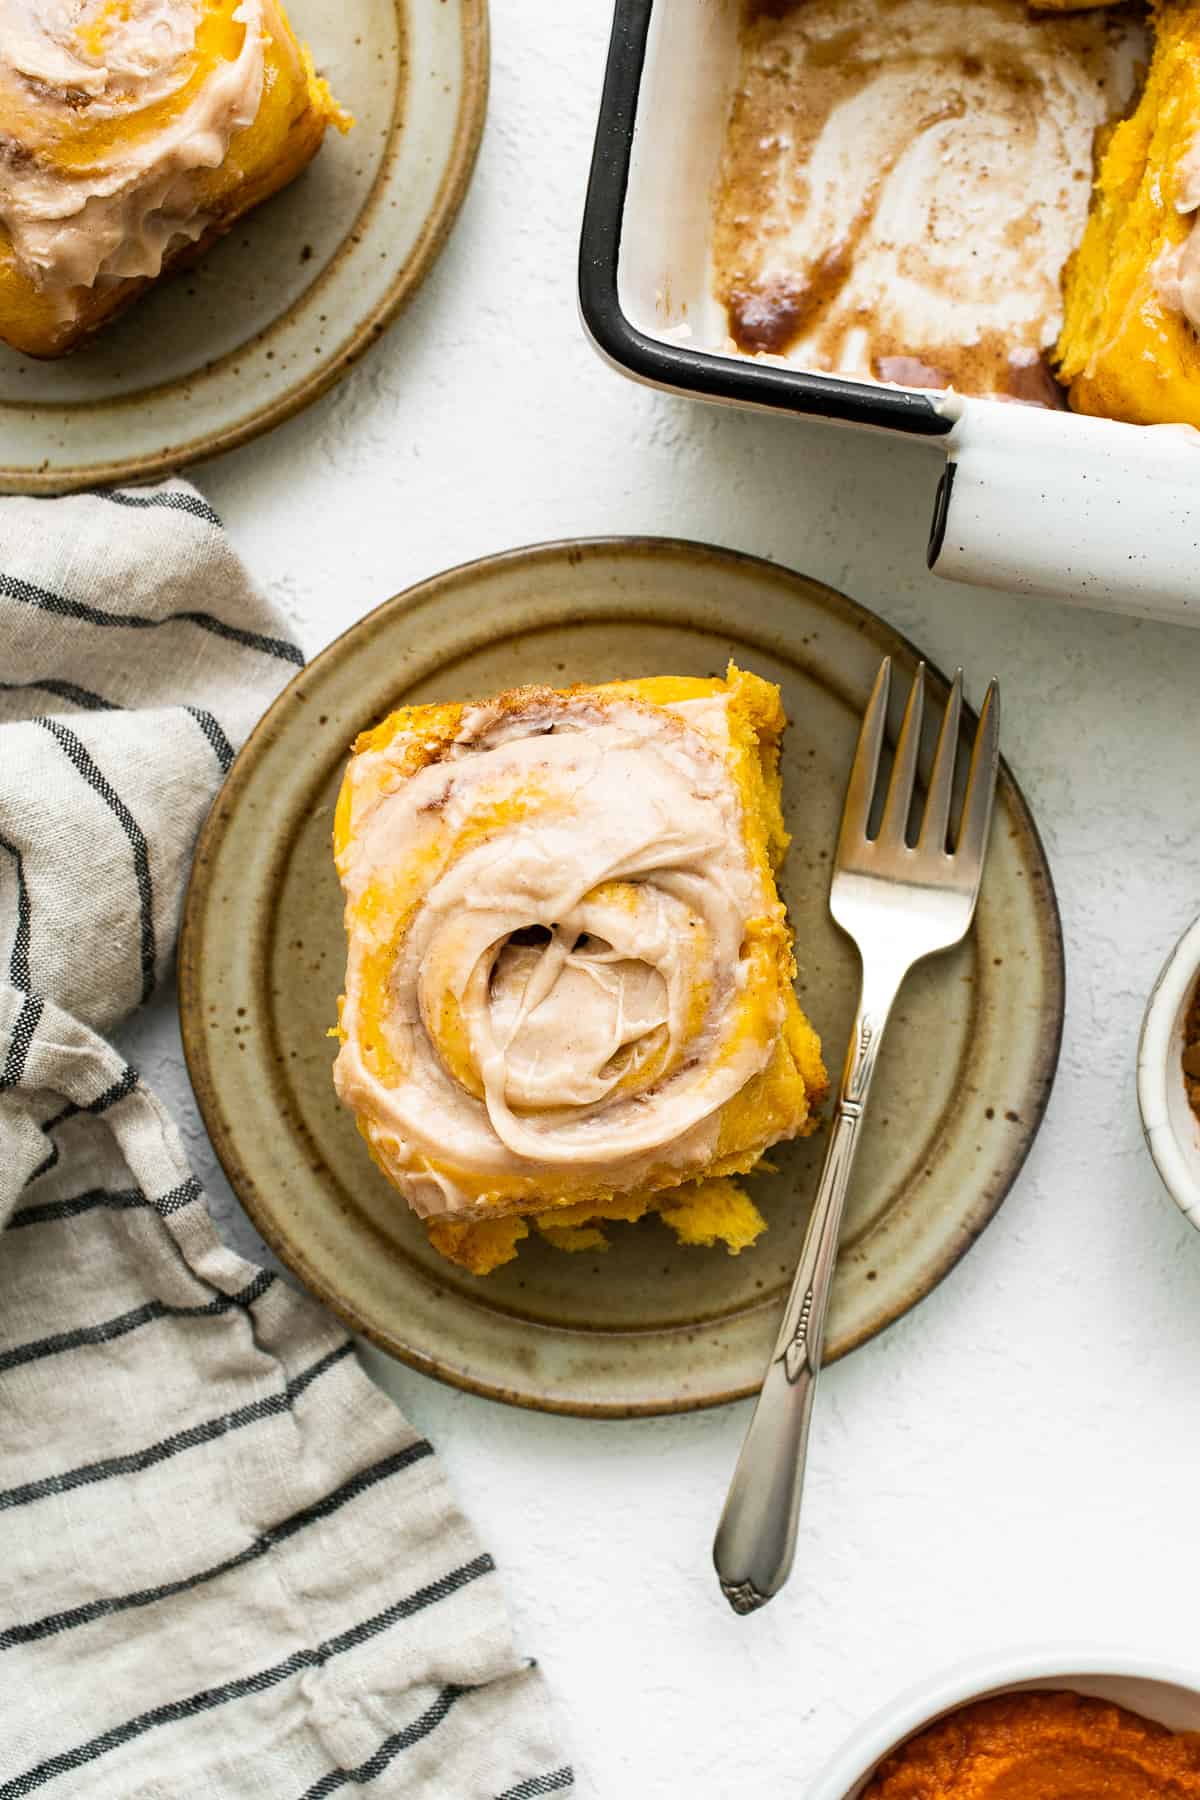 Pumpkin cinnamon roll on a plate with a fork.